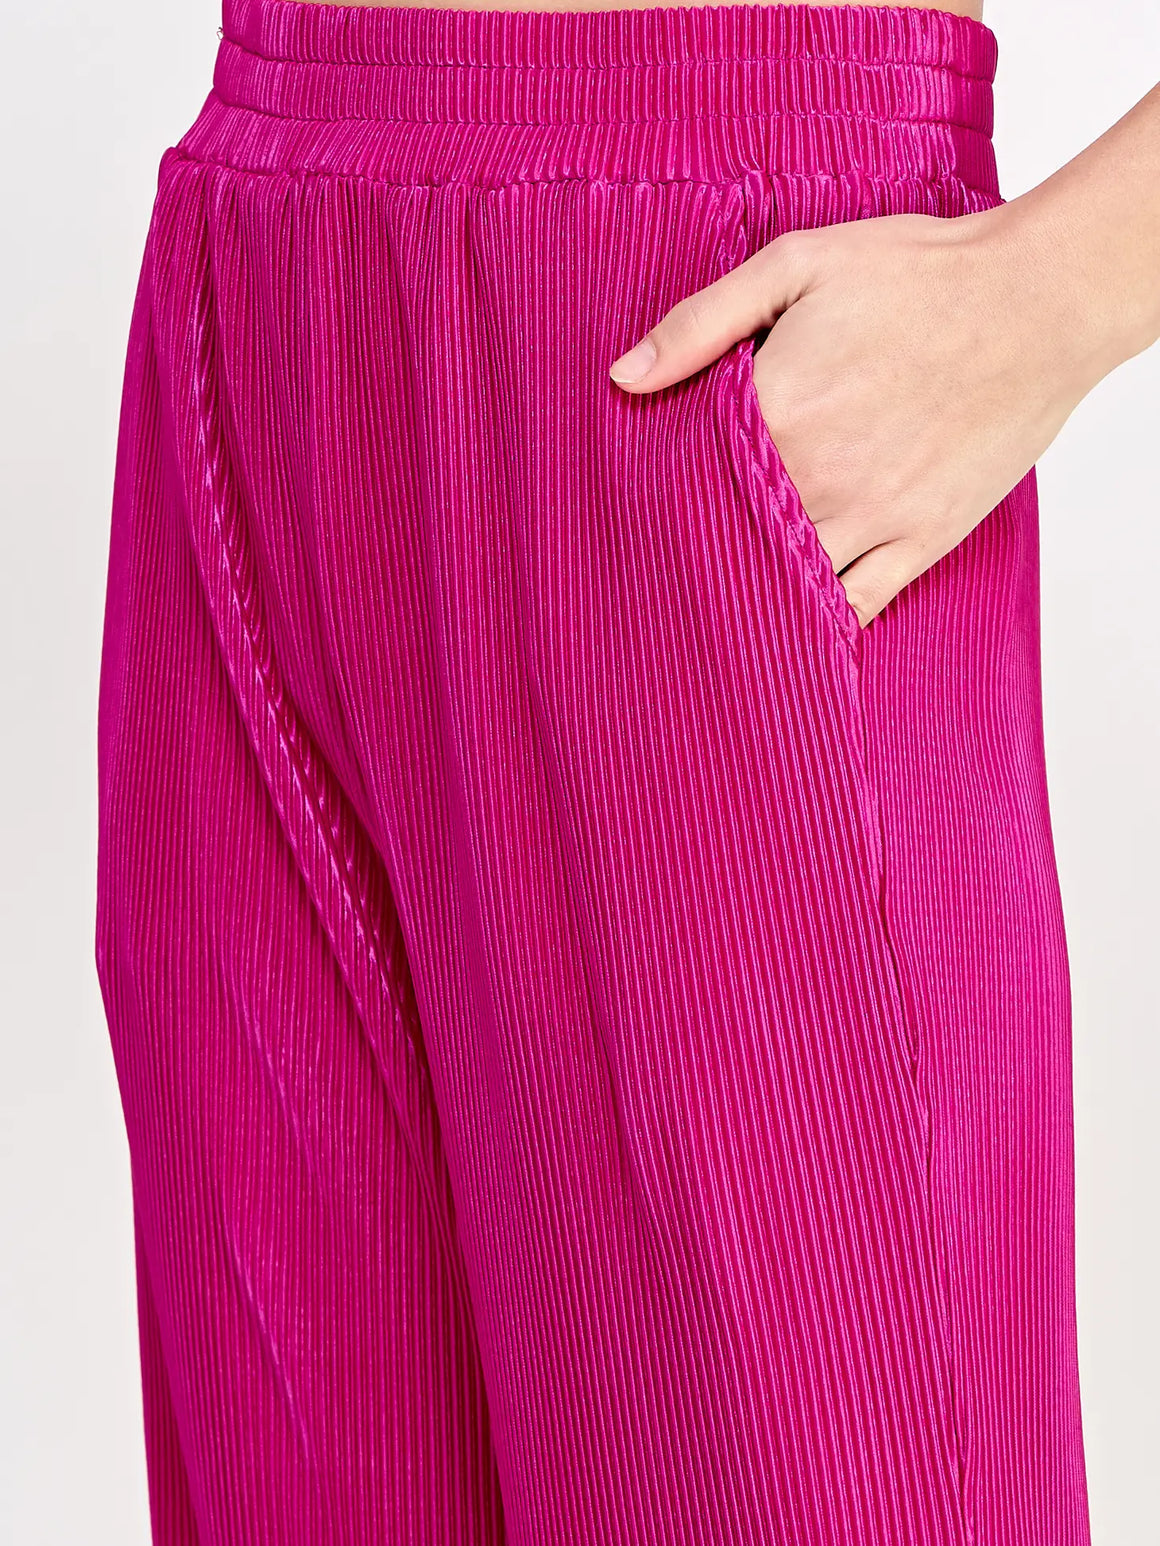 A Level Up Pleated Matching Set - Pants Magenta